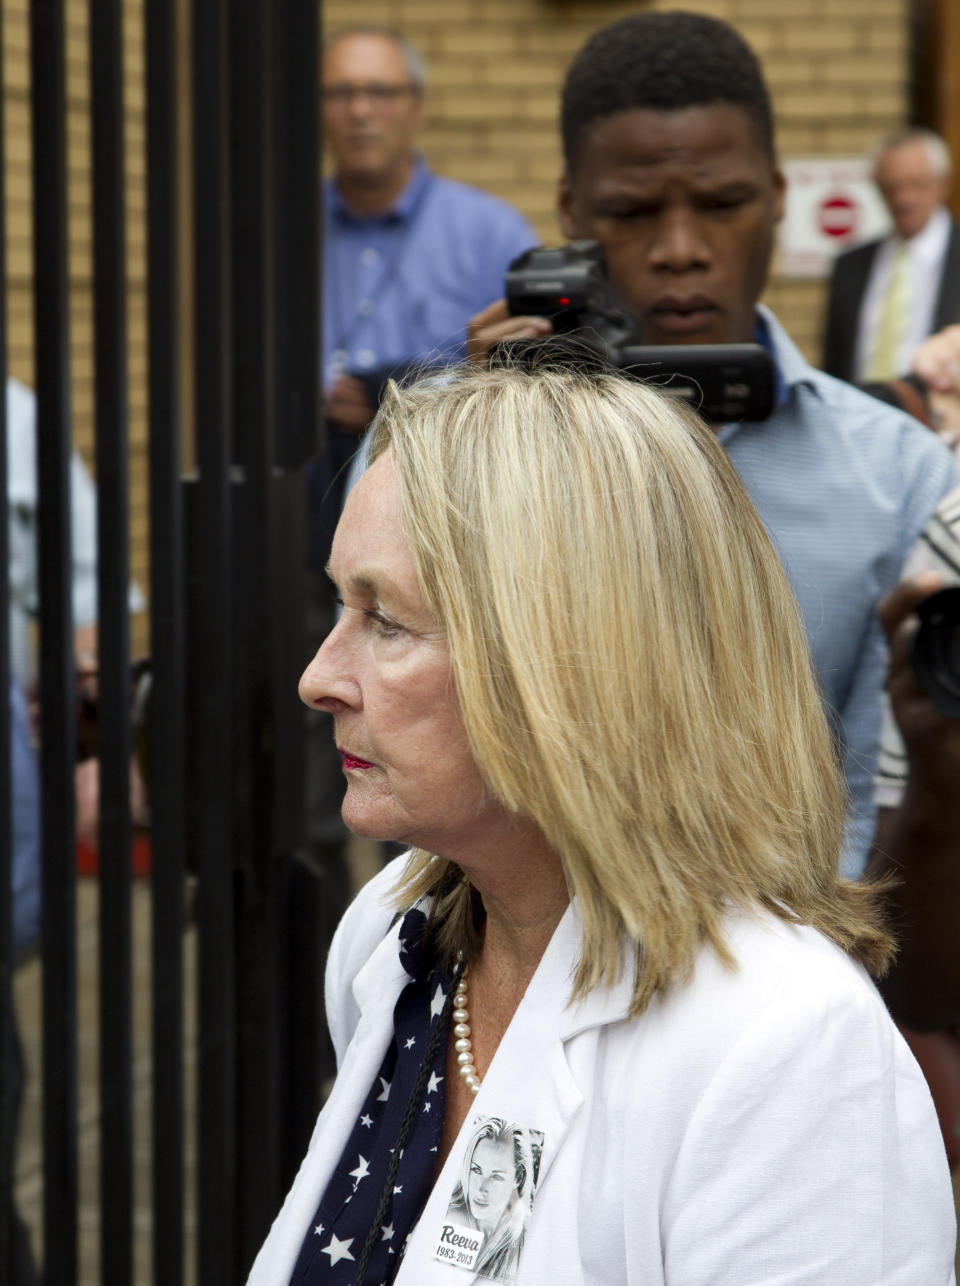 June Steenkamp, mother of Reeva Steenkamp, leaves the high court in Pretoria, South Africa, Monday, March 17, 2014, after a court break for lunch. Oscar Pistorius is charged with murder for the shooting death of his girlfriend, Reeva Steenkamp, on Valentines Day in 2013. (AP Photo/Themba Hadebe)